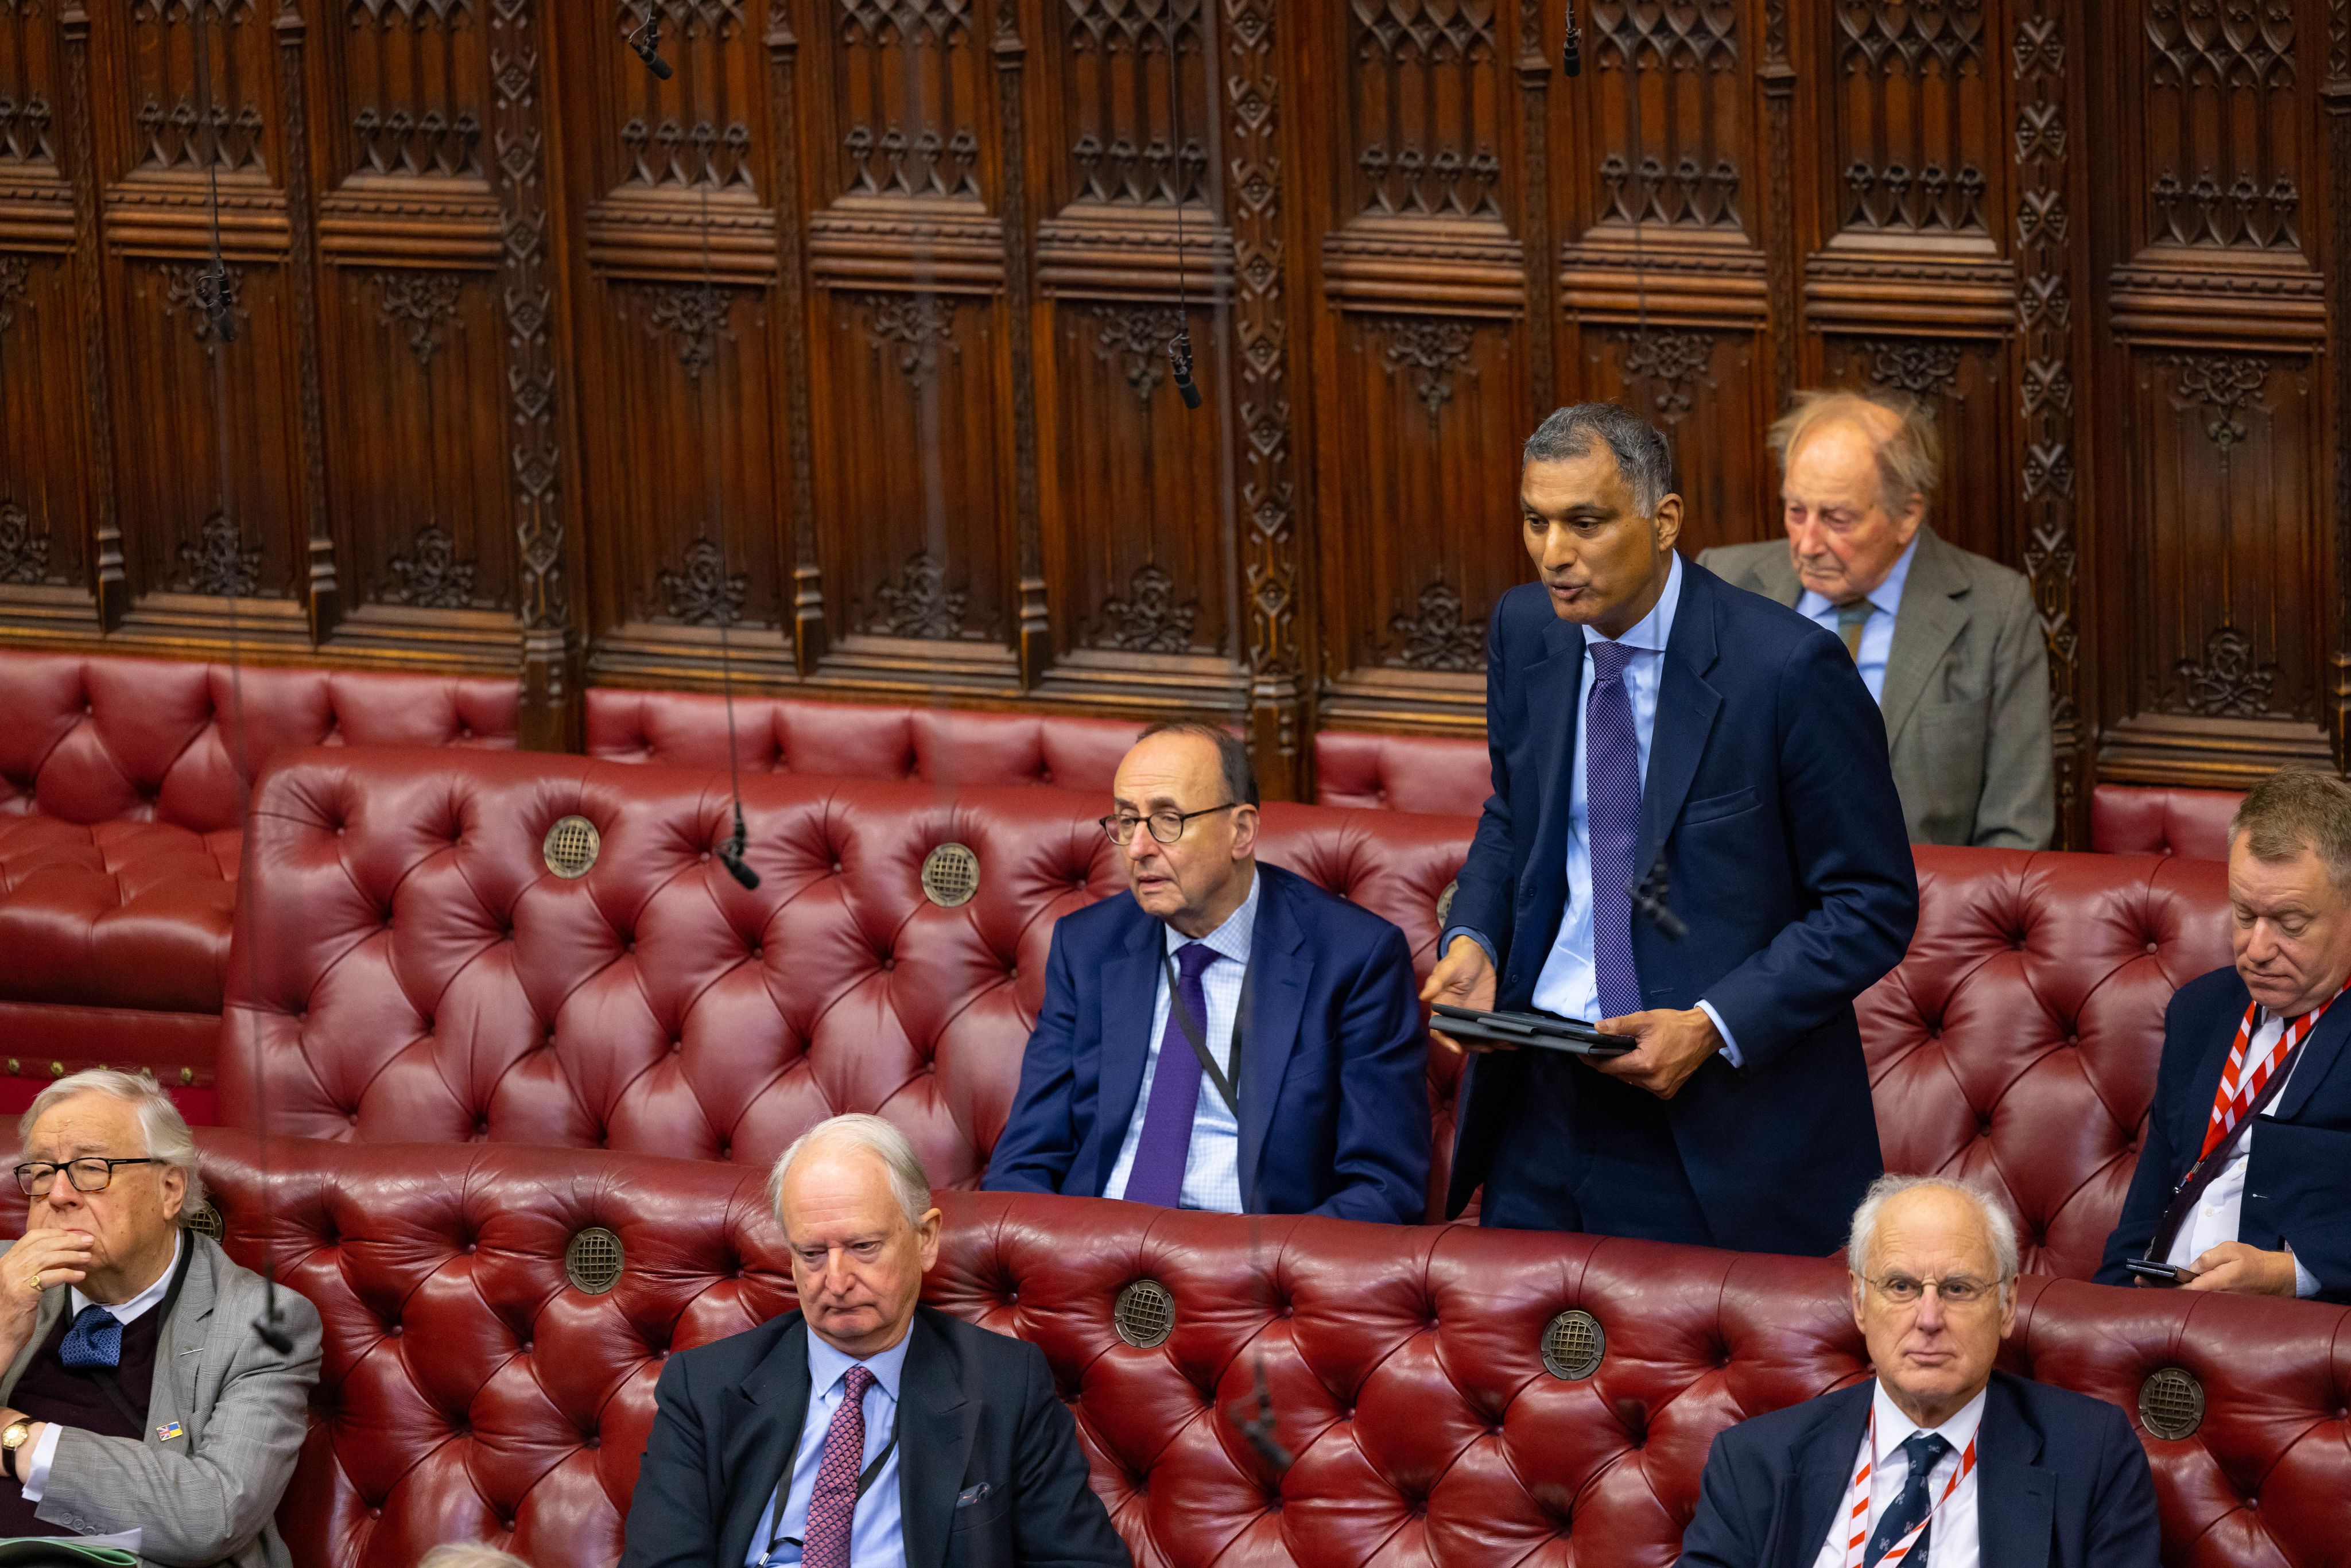 Lord Kamall stands in the Lords chamber to speak. Other members are seated on the red benches around him